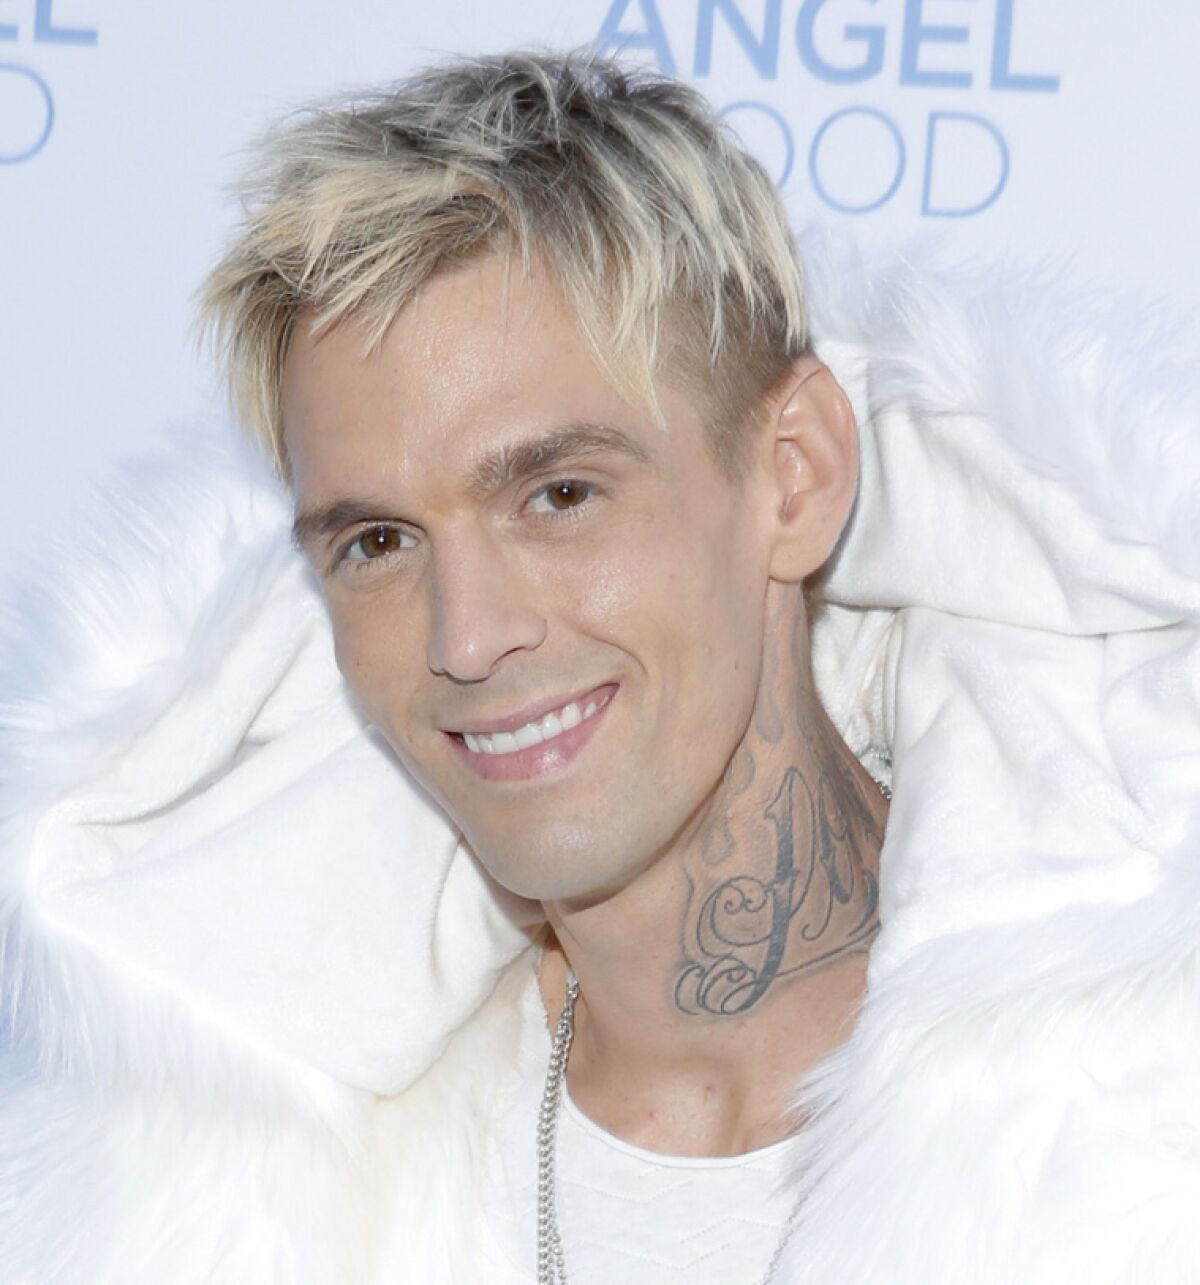 Aaron Carter's face before the new tattoo.